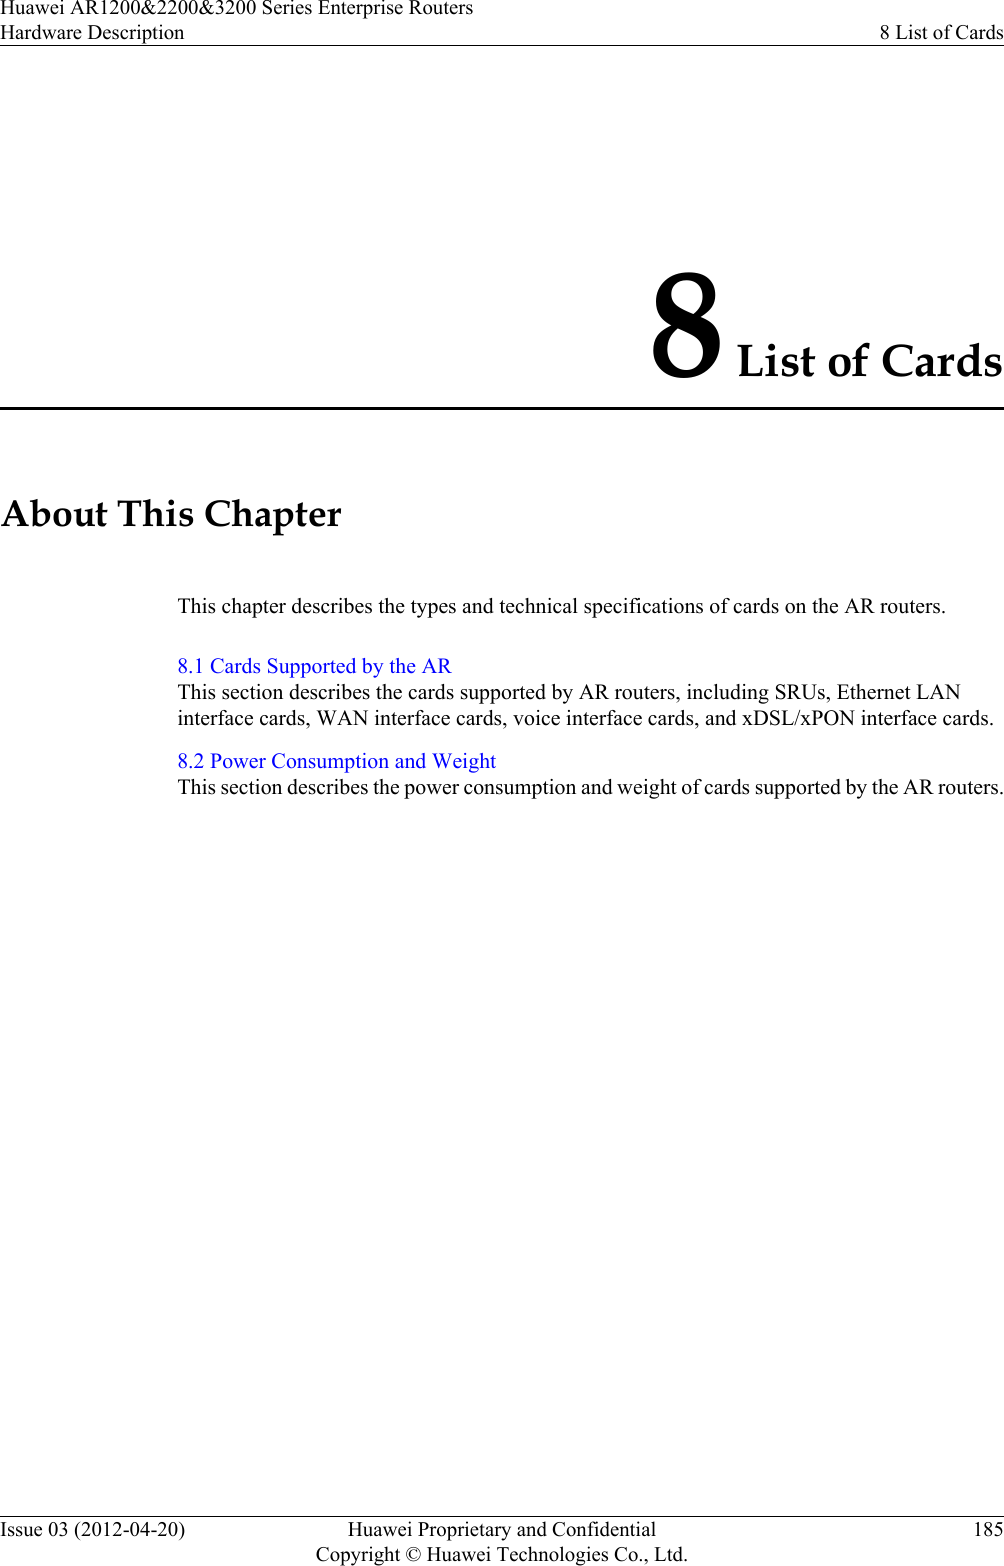 8 List of CardsAbout This ChapterThis chapter describes the types and technical specifications of cards on the AR routers.8.1 Cards Supported by the ARThis section describes the cards supported by AR routers, including SRUs, Ethernet LANinterface cards, WAN interface cards, voice interface cards, and xDSL/xPON interface cards.8.2 Power Consumption and WeightThis section describes the power consumption and weight of cards supported by the AR routers.Huawei AR1200&amp;2200&amp;3200 Series Enterprise RoutersHardware Description 8 List of CardsIssue 03 (2012-04-20) Huawei Proprietary and ConfidentialCopyright © Huawei Technologies Co., Ltd.185